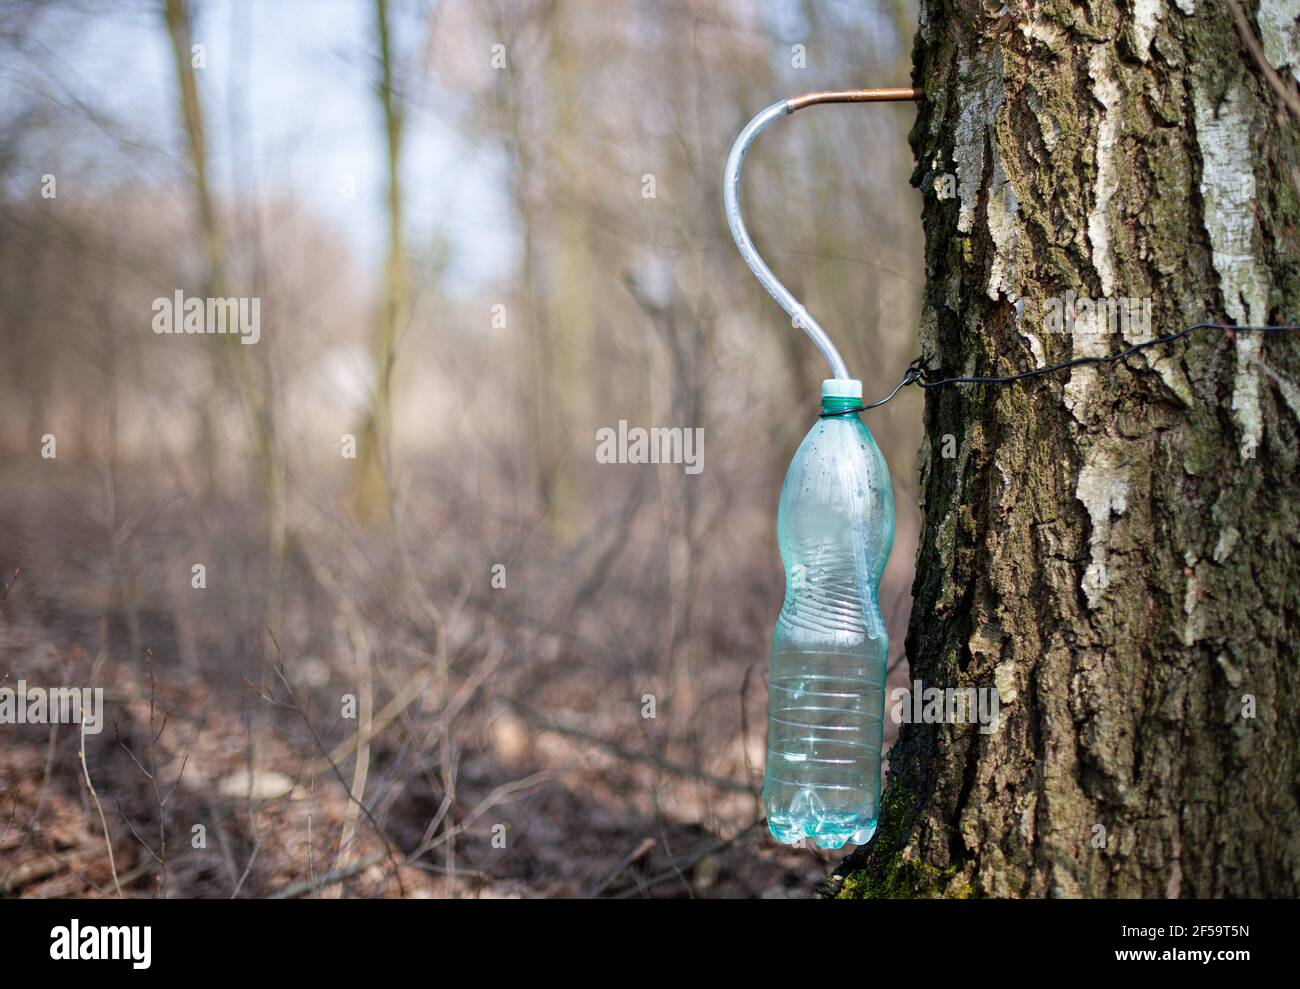 Extracts the juice from the birch, plastic bottle. Stock Photo